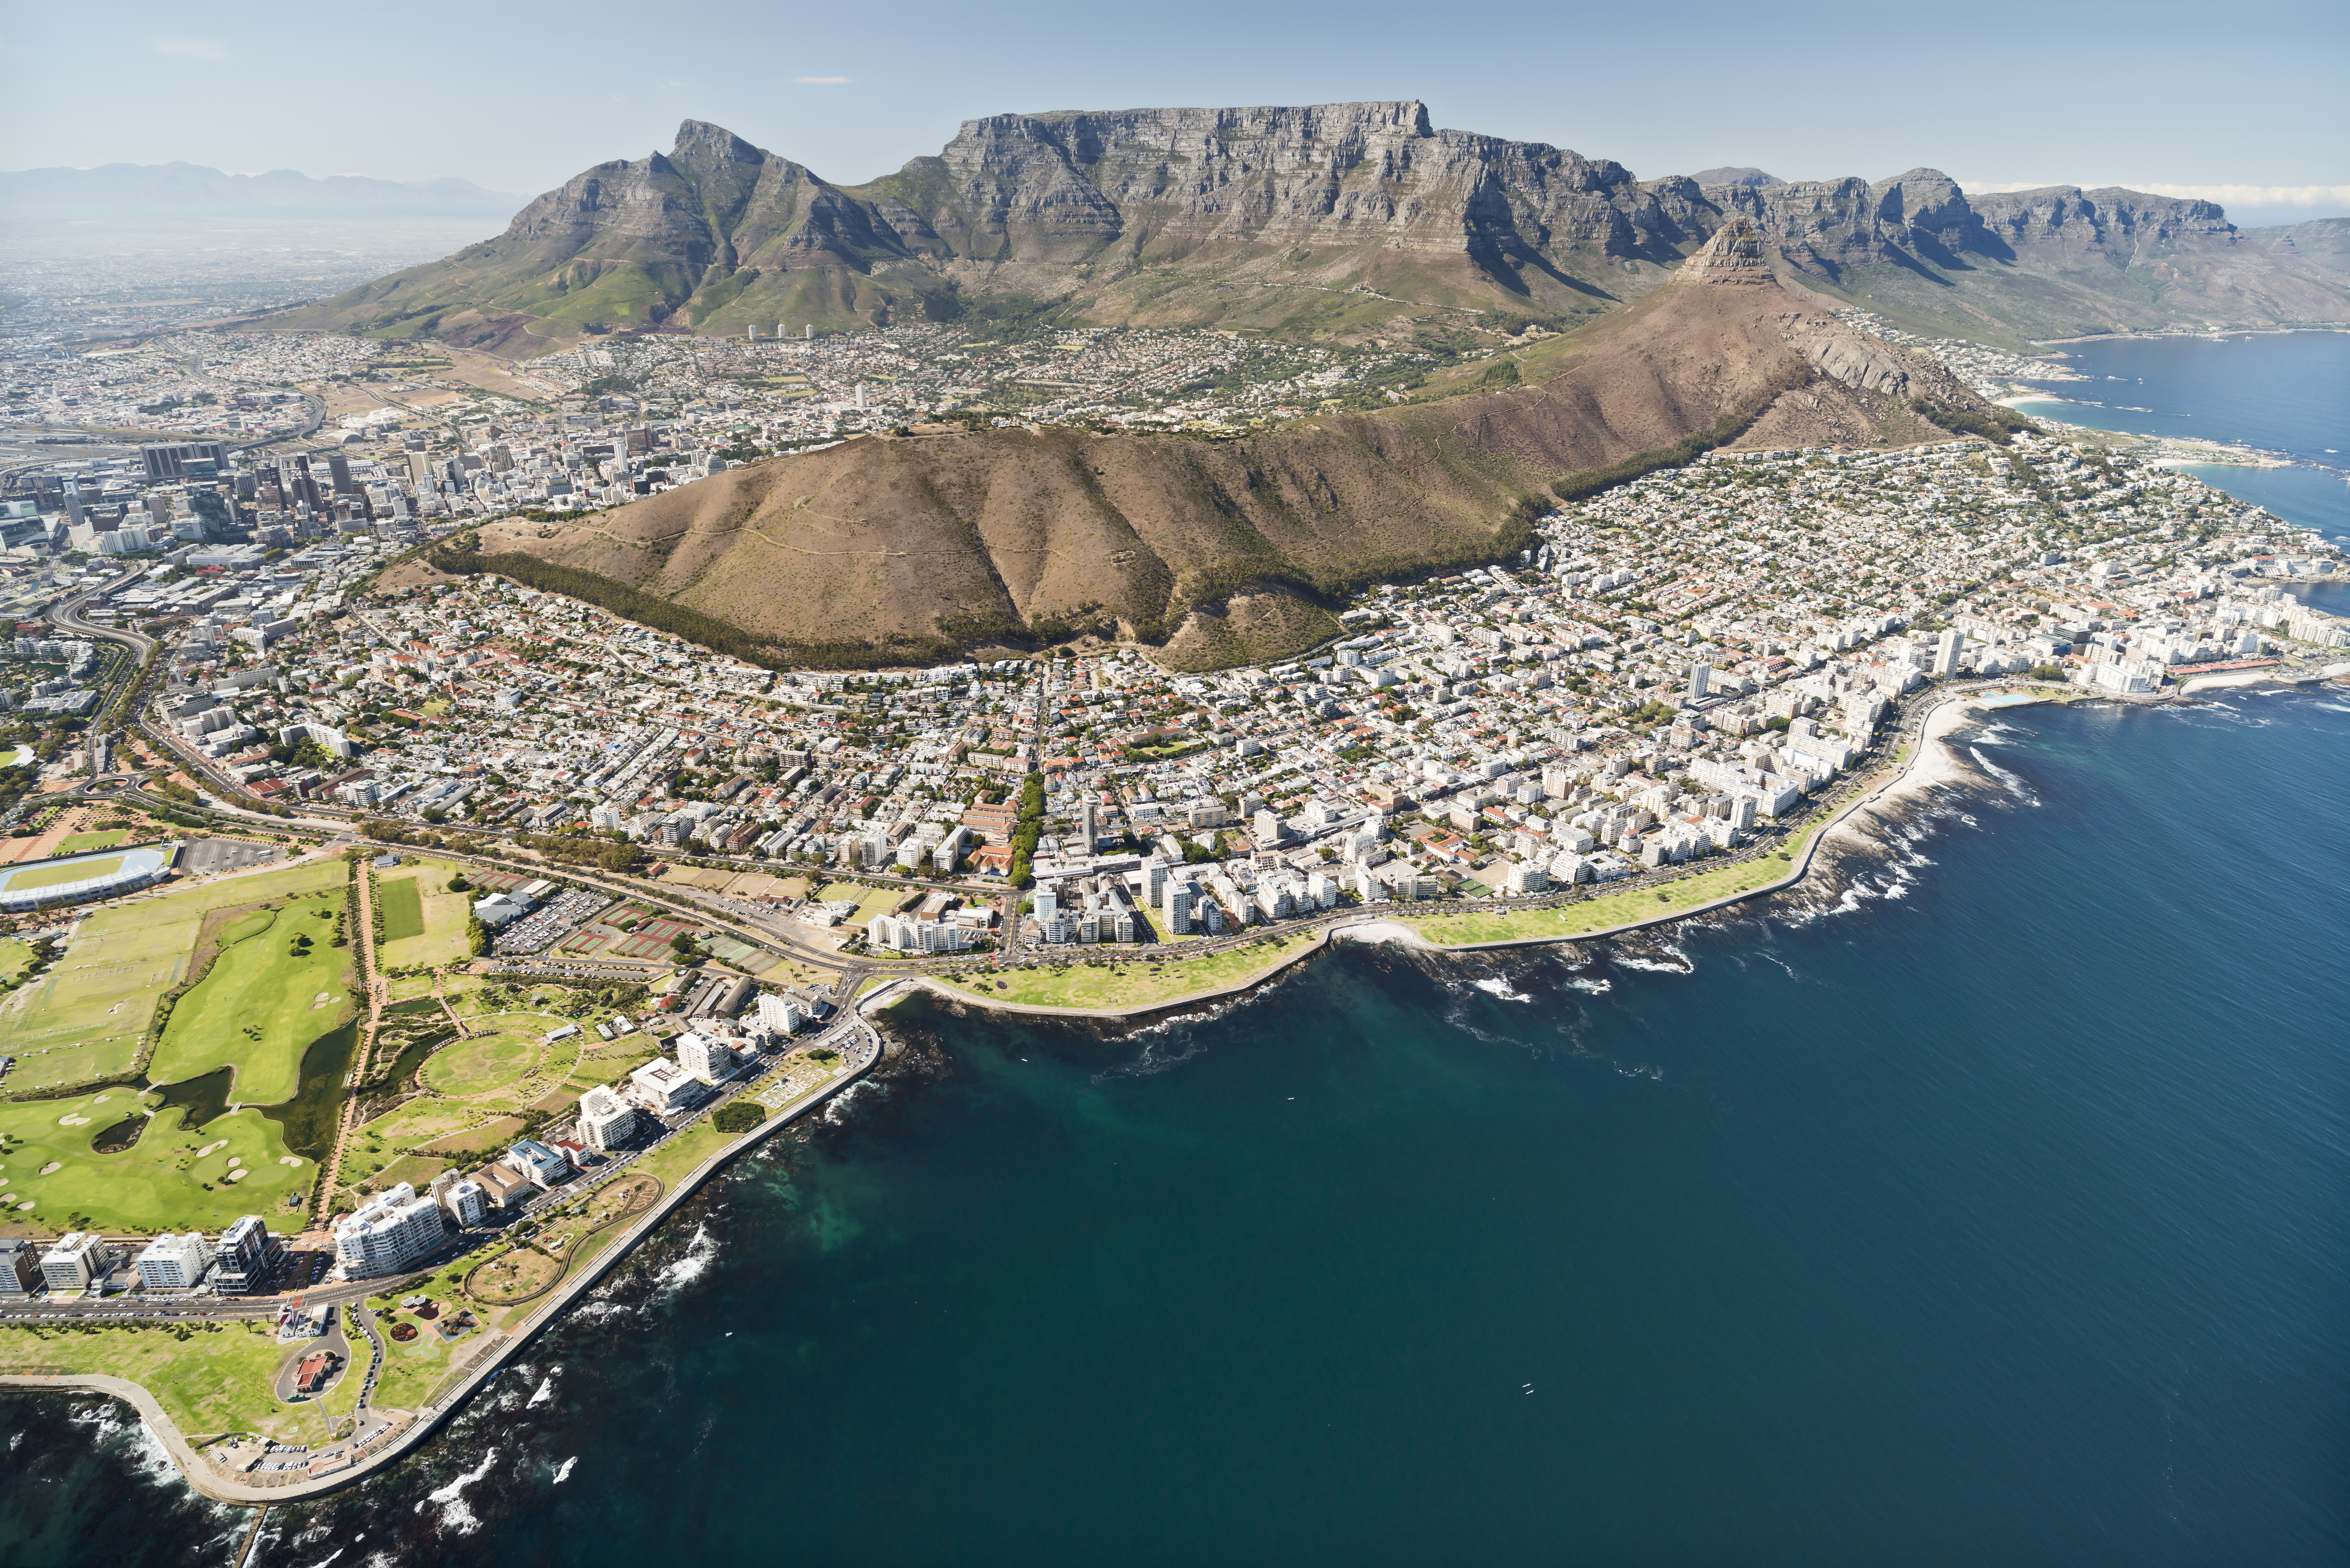 South Africa, aerial view of Cape Town